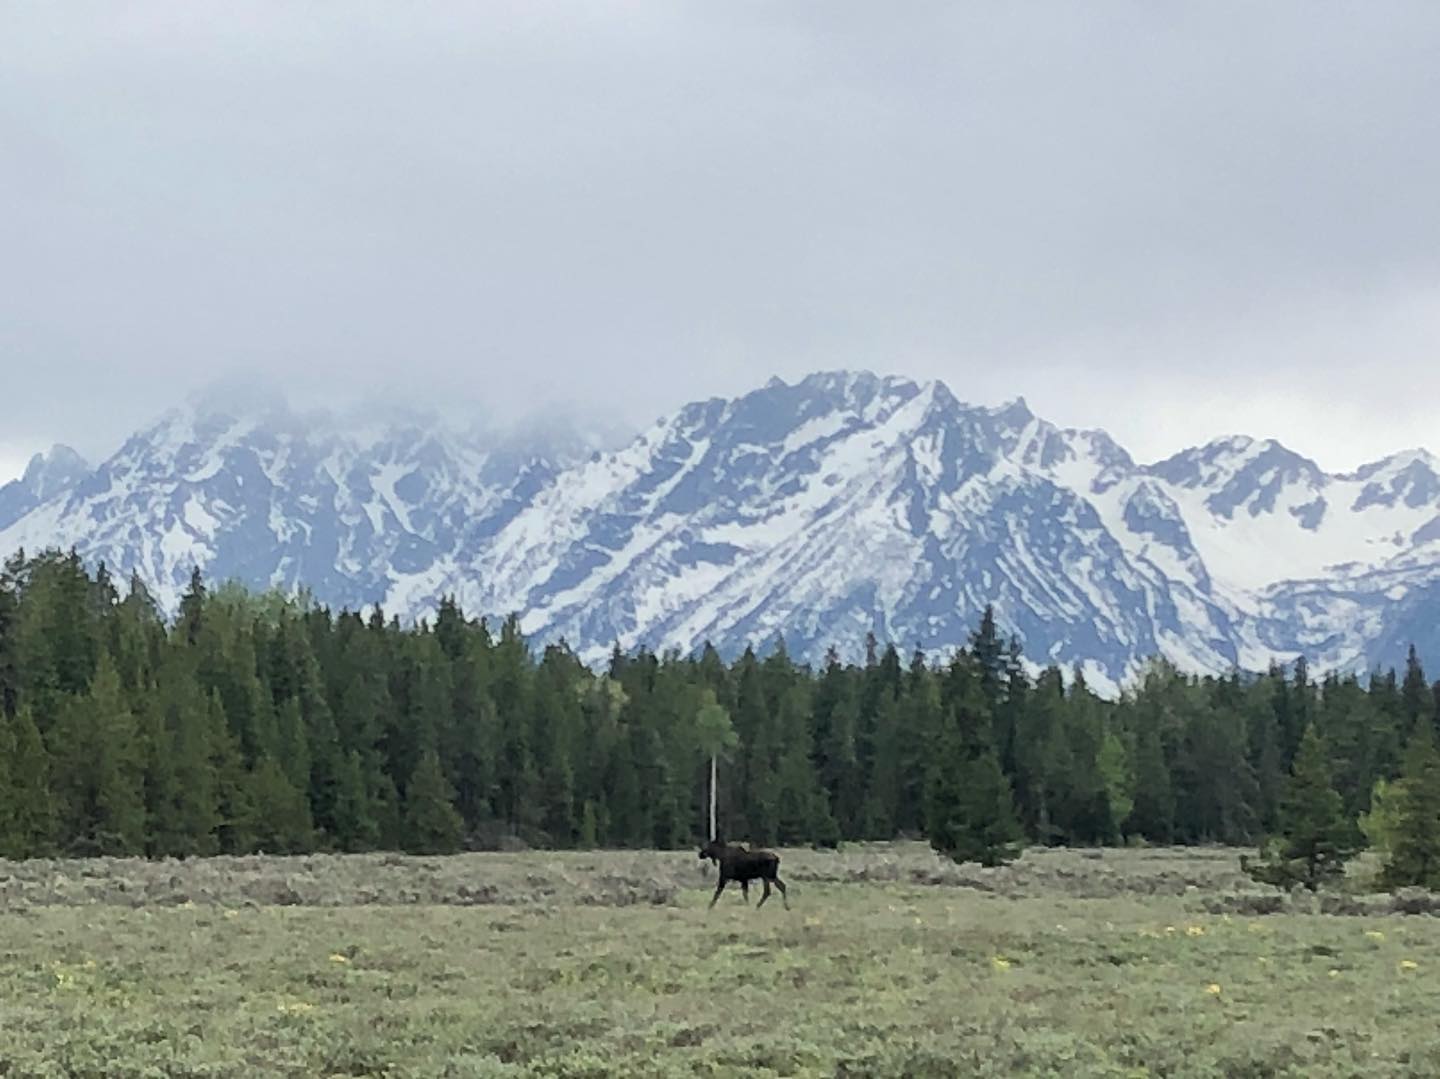 Almost a year ago when finally spotted my first moose in the Tetons! Been searching for years and is still an amazing memory Ill never forget!!